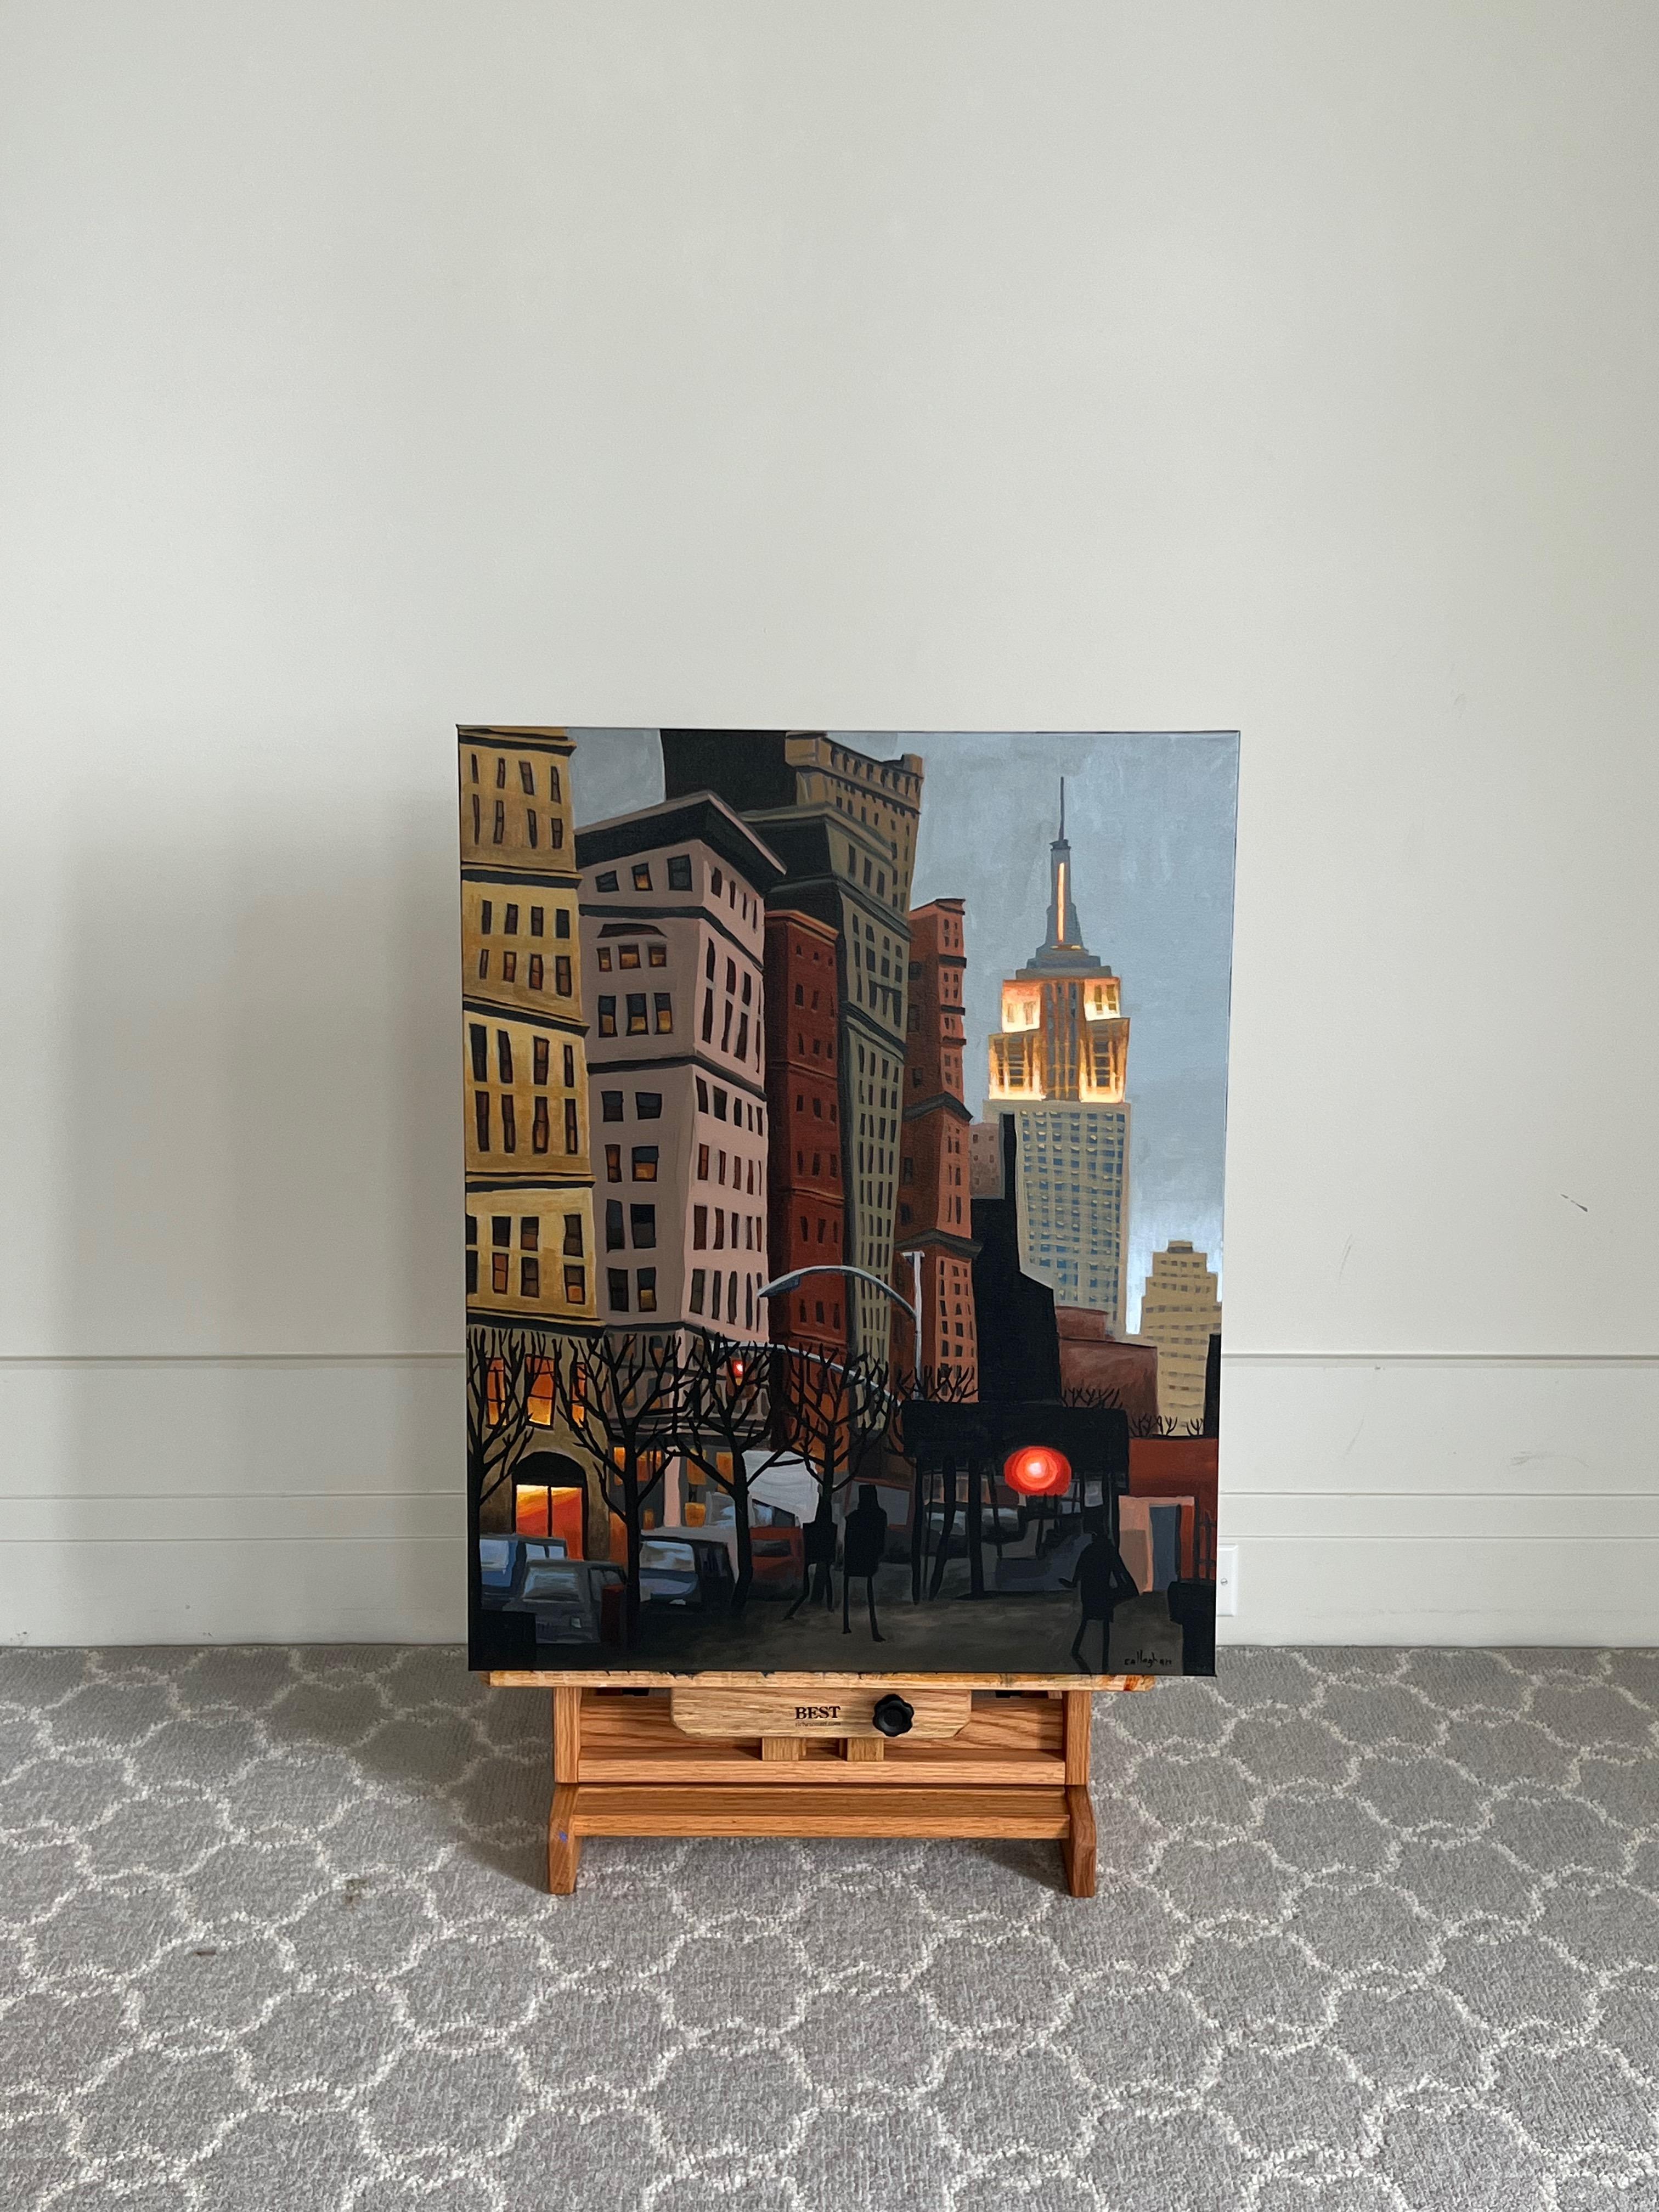 <p>Artist Comments<br>Artist Brian Callaghan presents a street scene with the Empire State Building standing tall in the background. The iconic skyscraper emits an orange glow, casting a captivating ambiance over the early evening cityscape. The